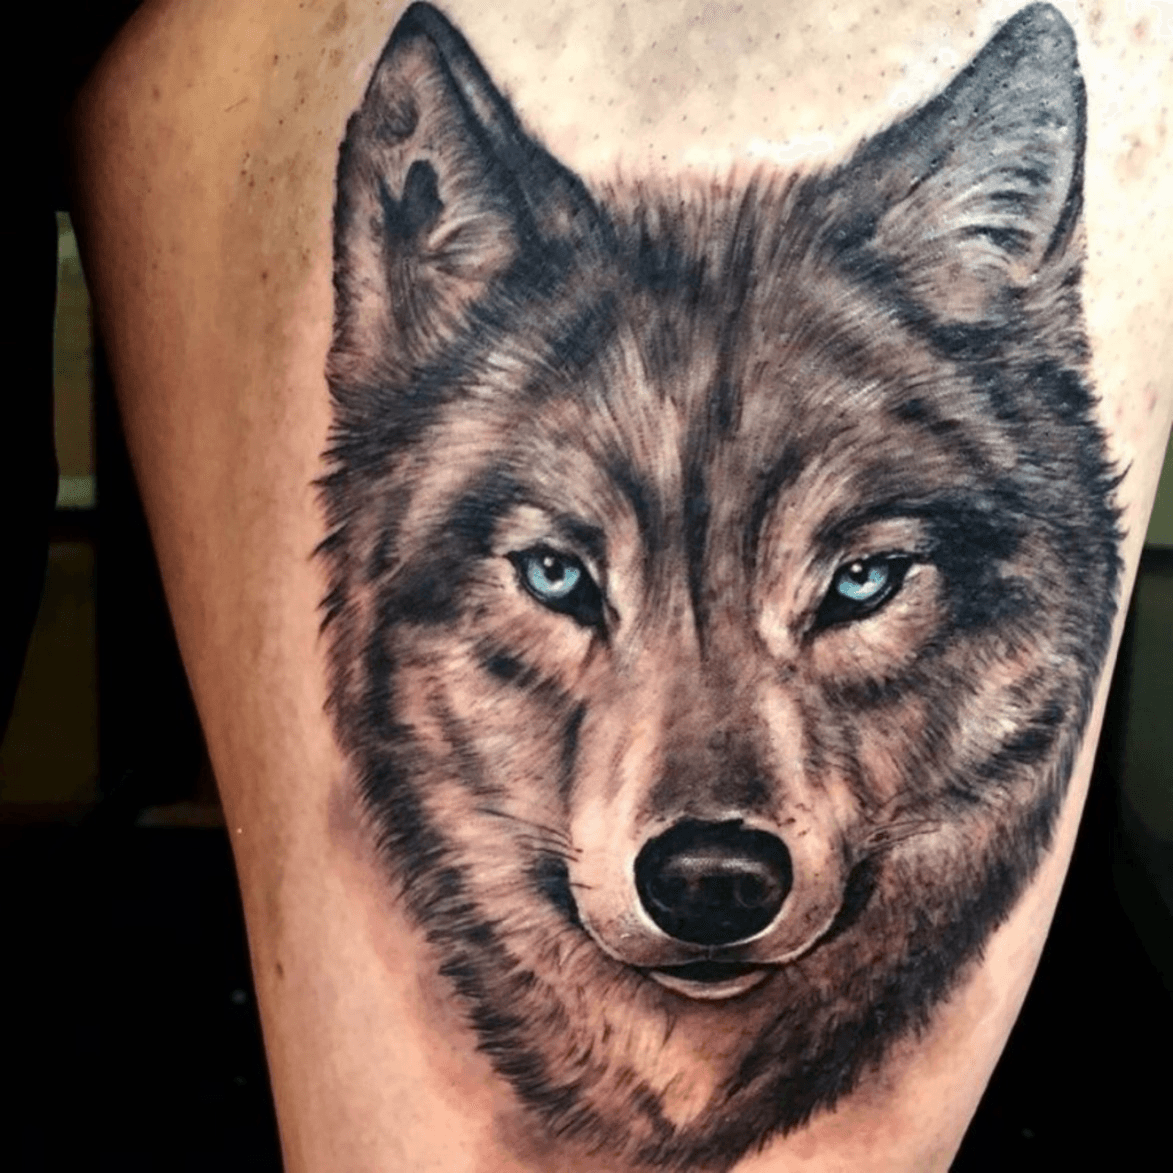 Tattoo uploaded by Brooke  Want a black and grey wolf with blue eyes  megandreamtattoo  Tattoodo